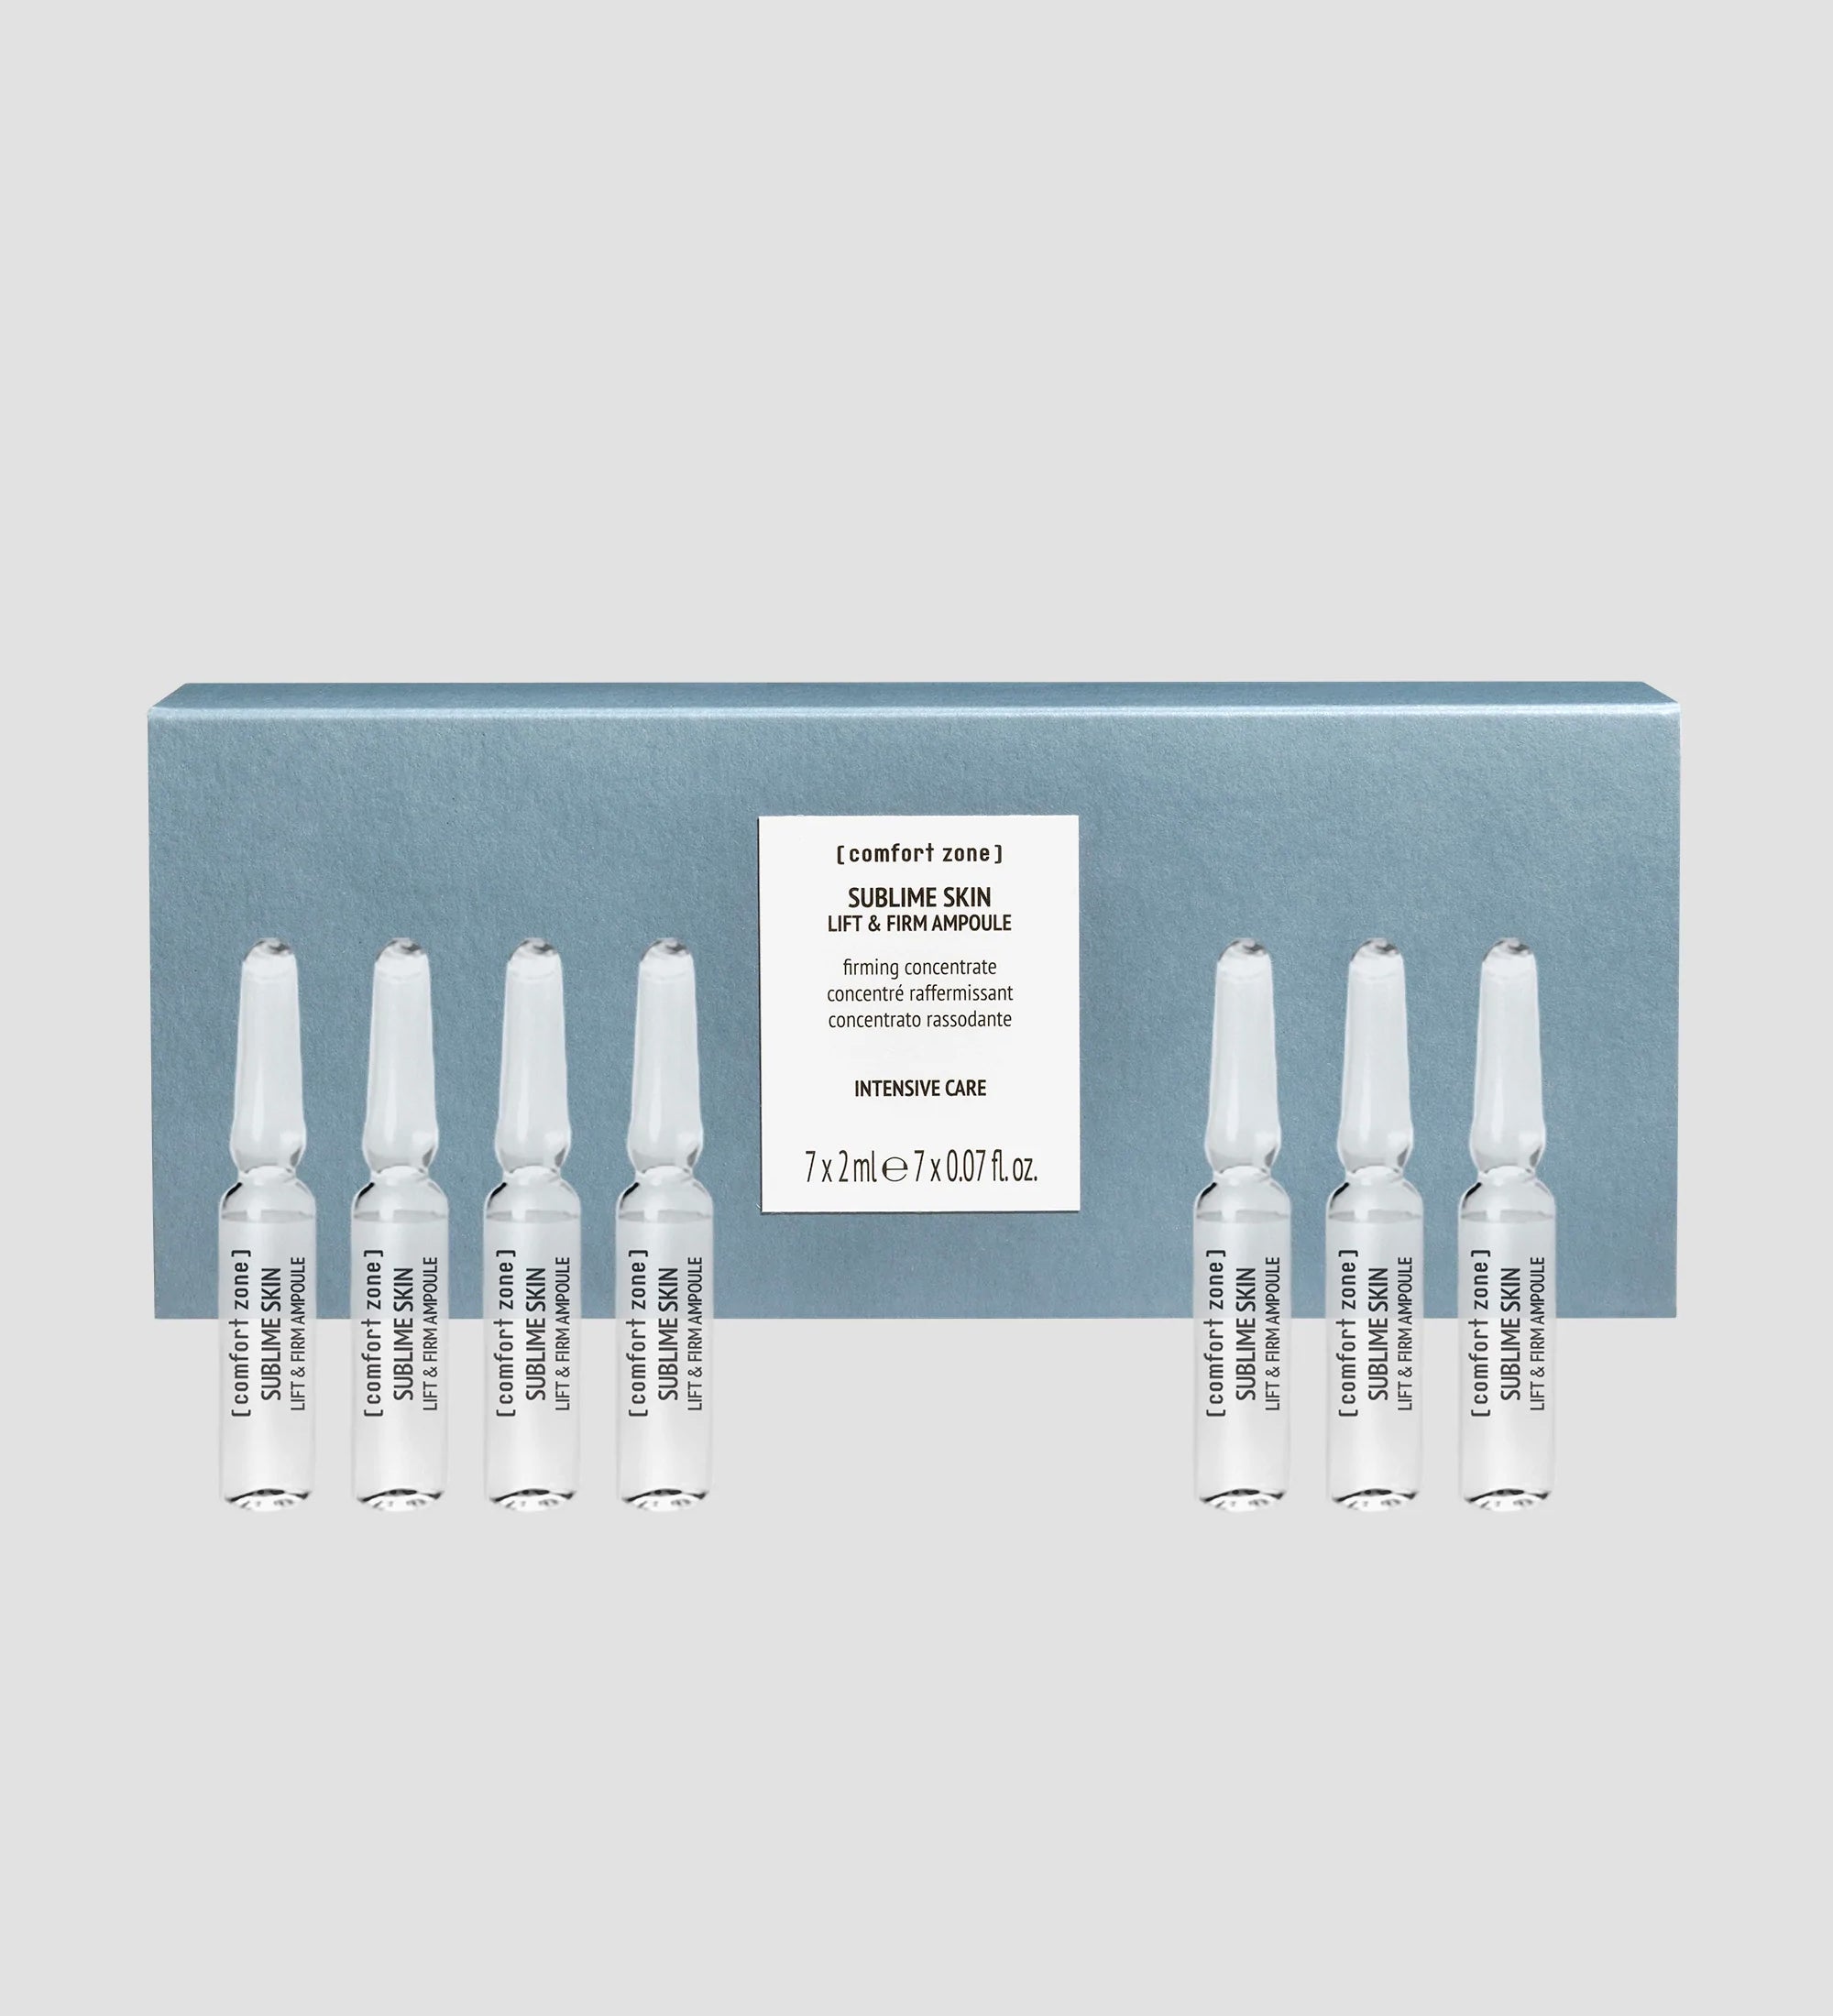 Comfort Zone: SUBLIME SKIN LIFT &amp; FIRM AMPOULES Firming concentrate-